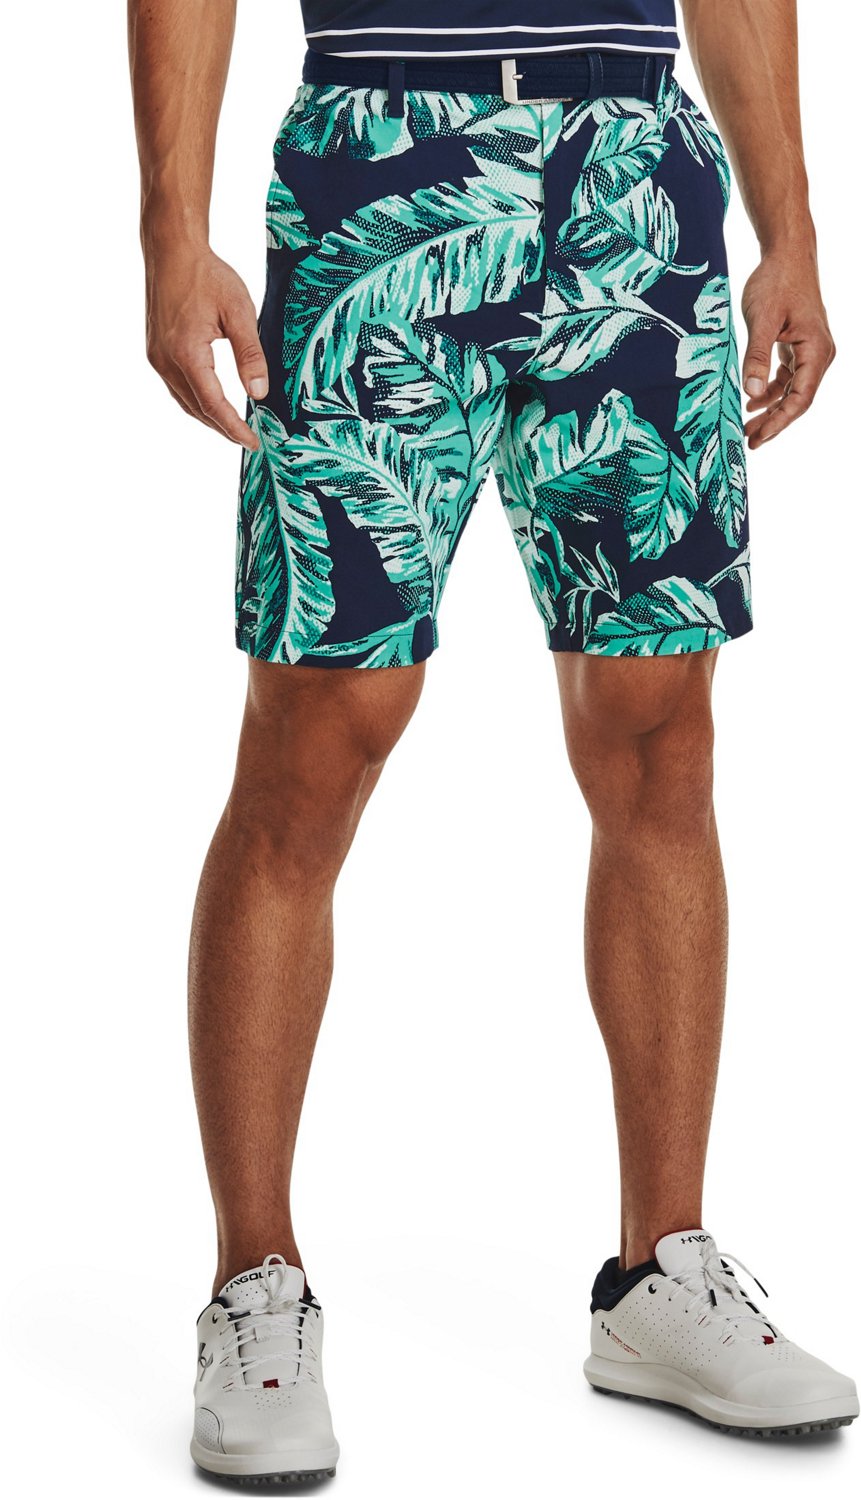 Under Armour Mens Drive Printed Shorts